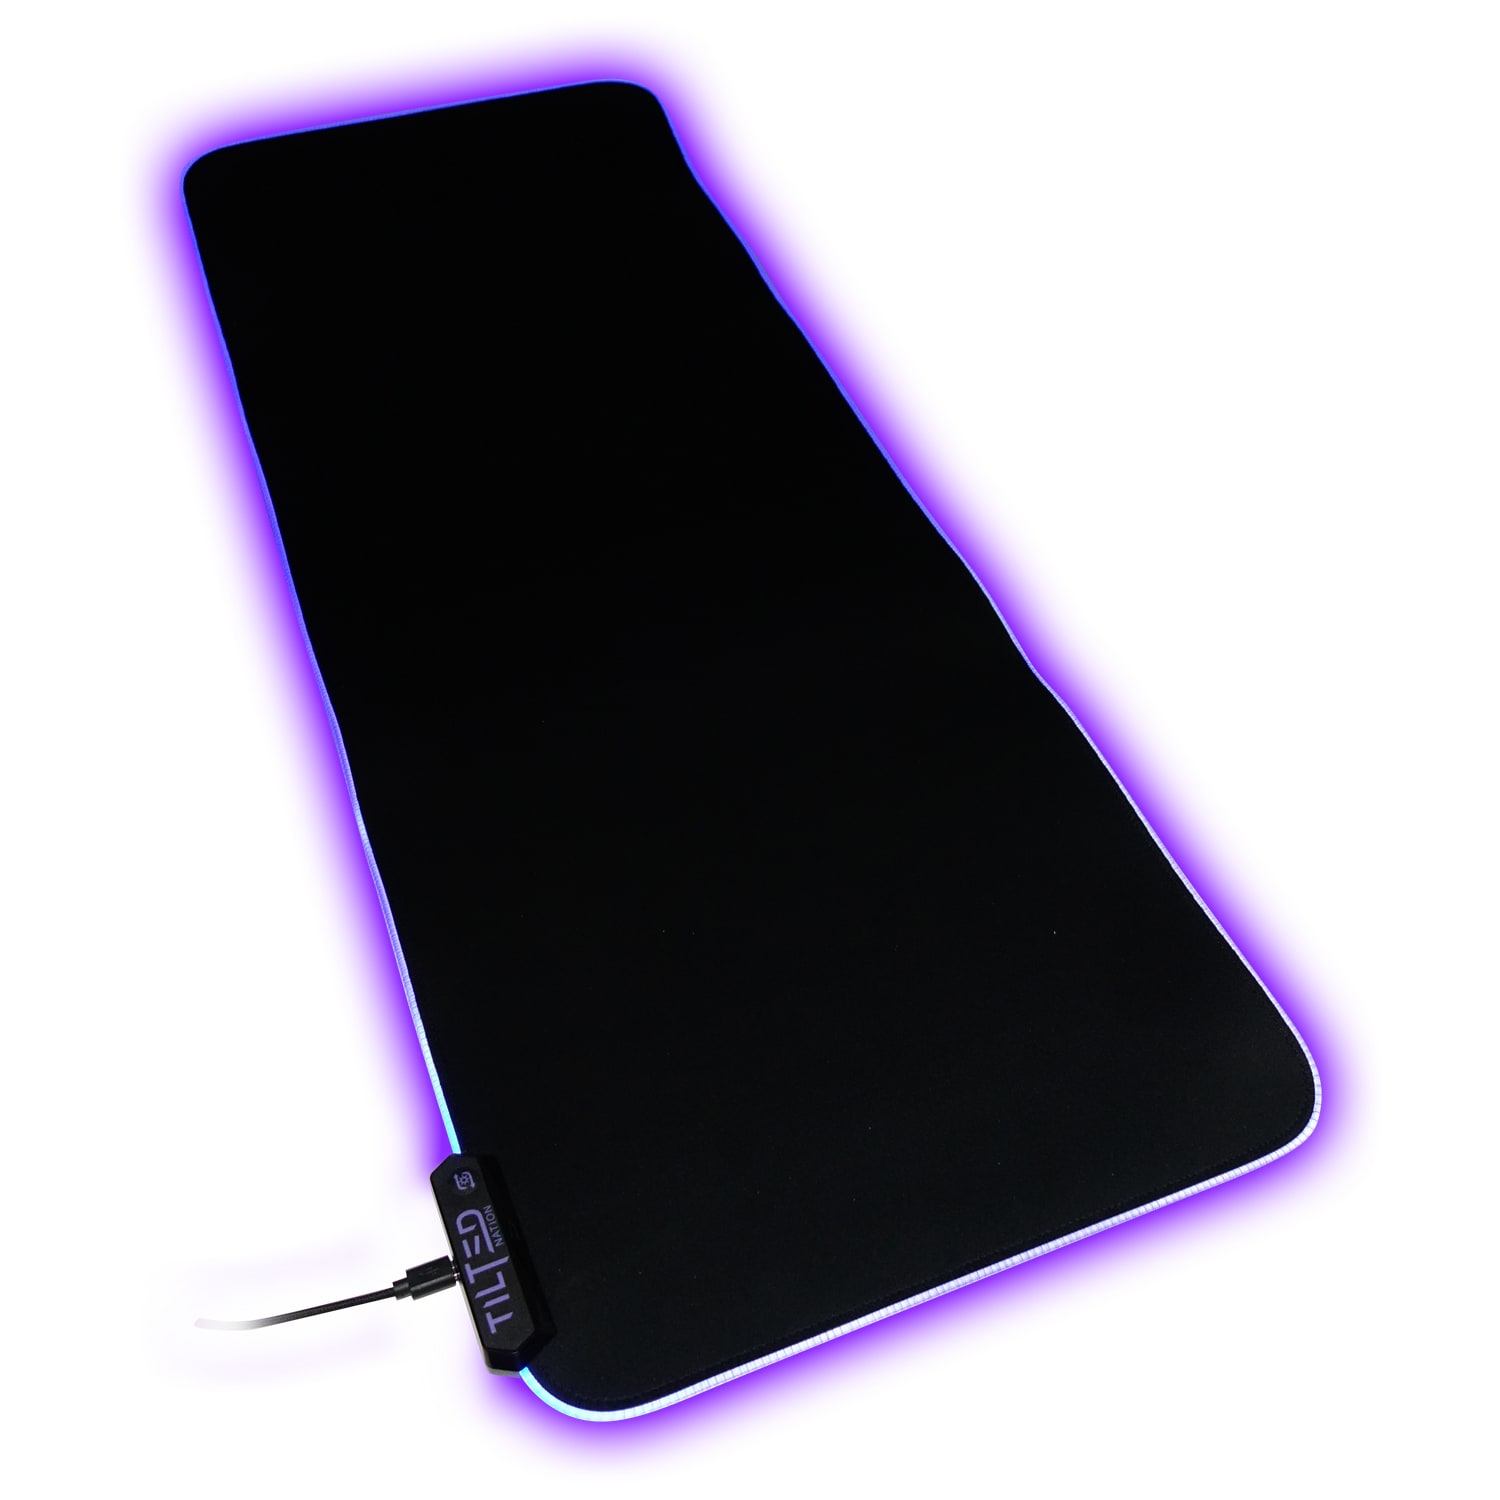 Macally Tilted Nation Extended Mouse Pad Large - RGB Mouse Pad LED Light Up - Mice and Keyboard Mat with Non-Slip Mousepad - Easy to Clean, Water Resistant Desk